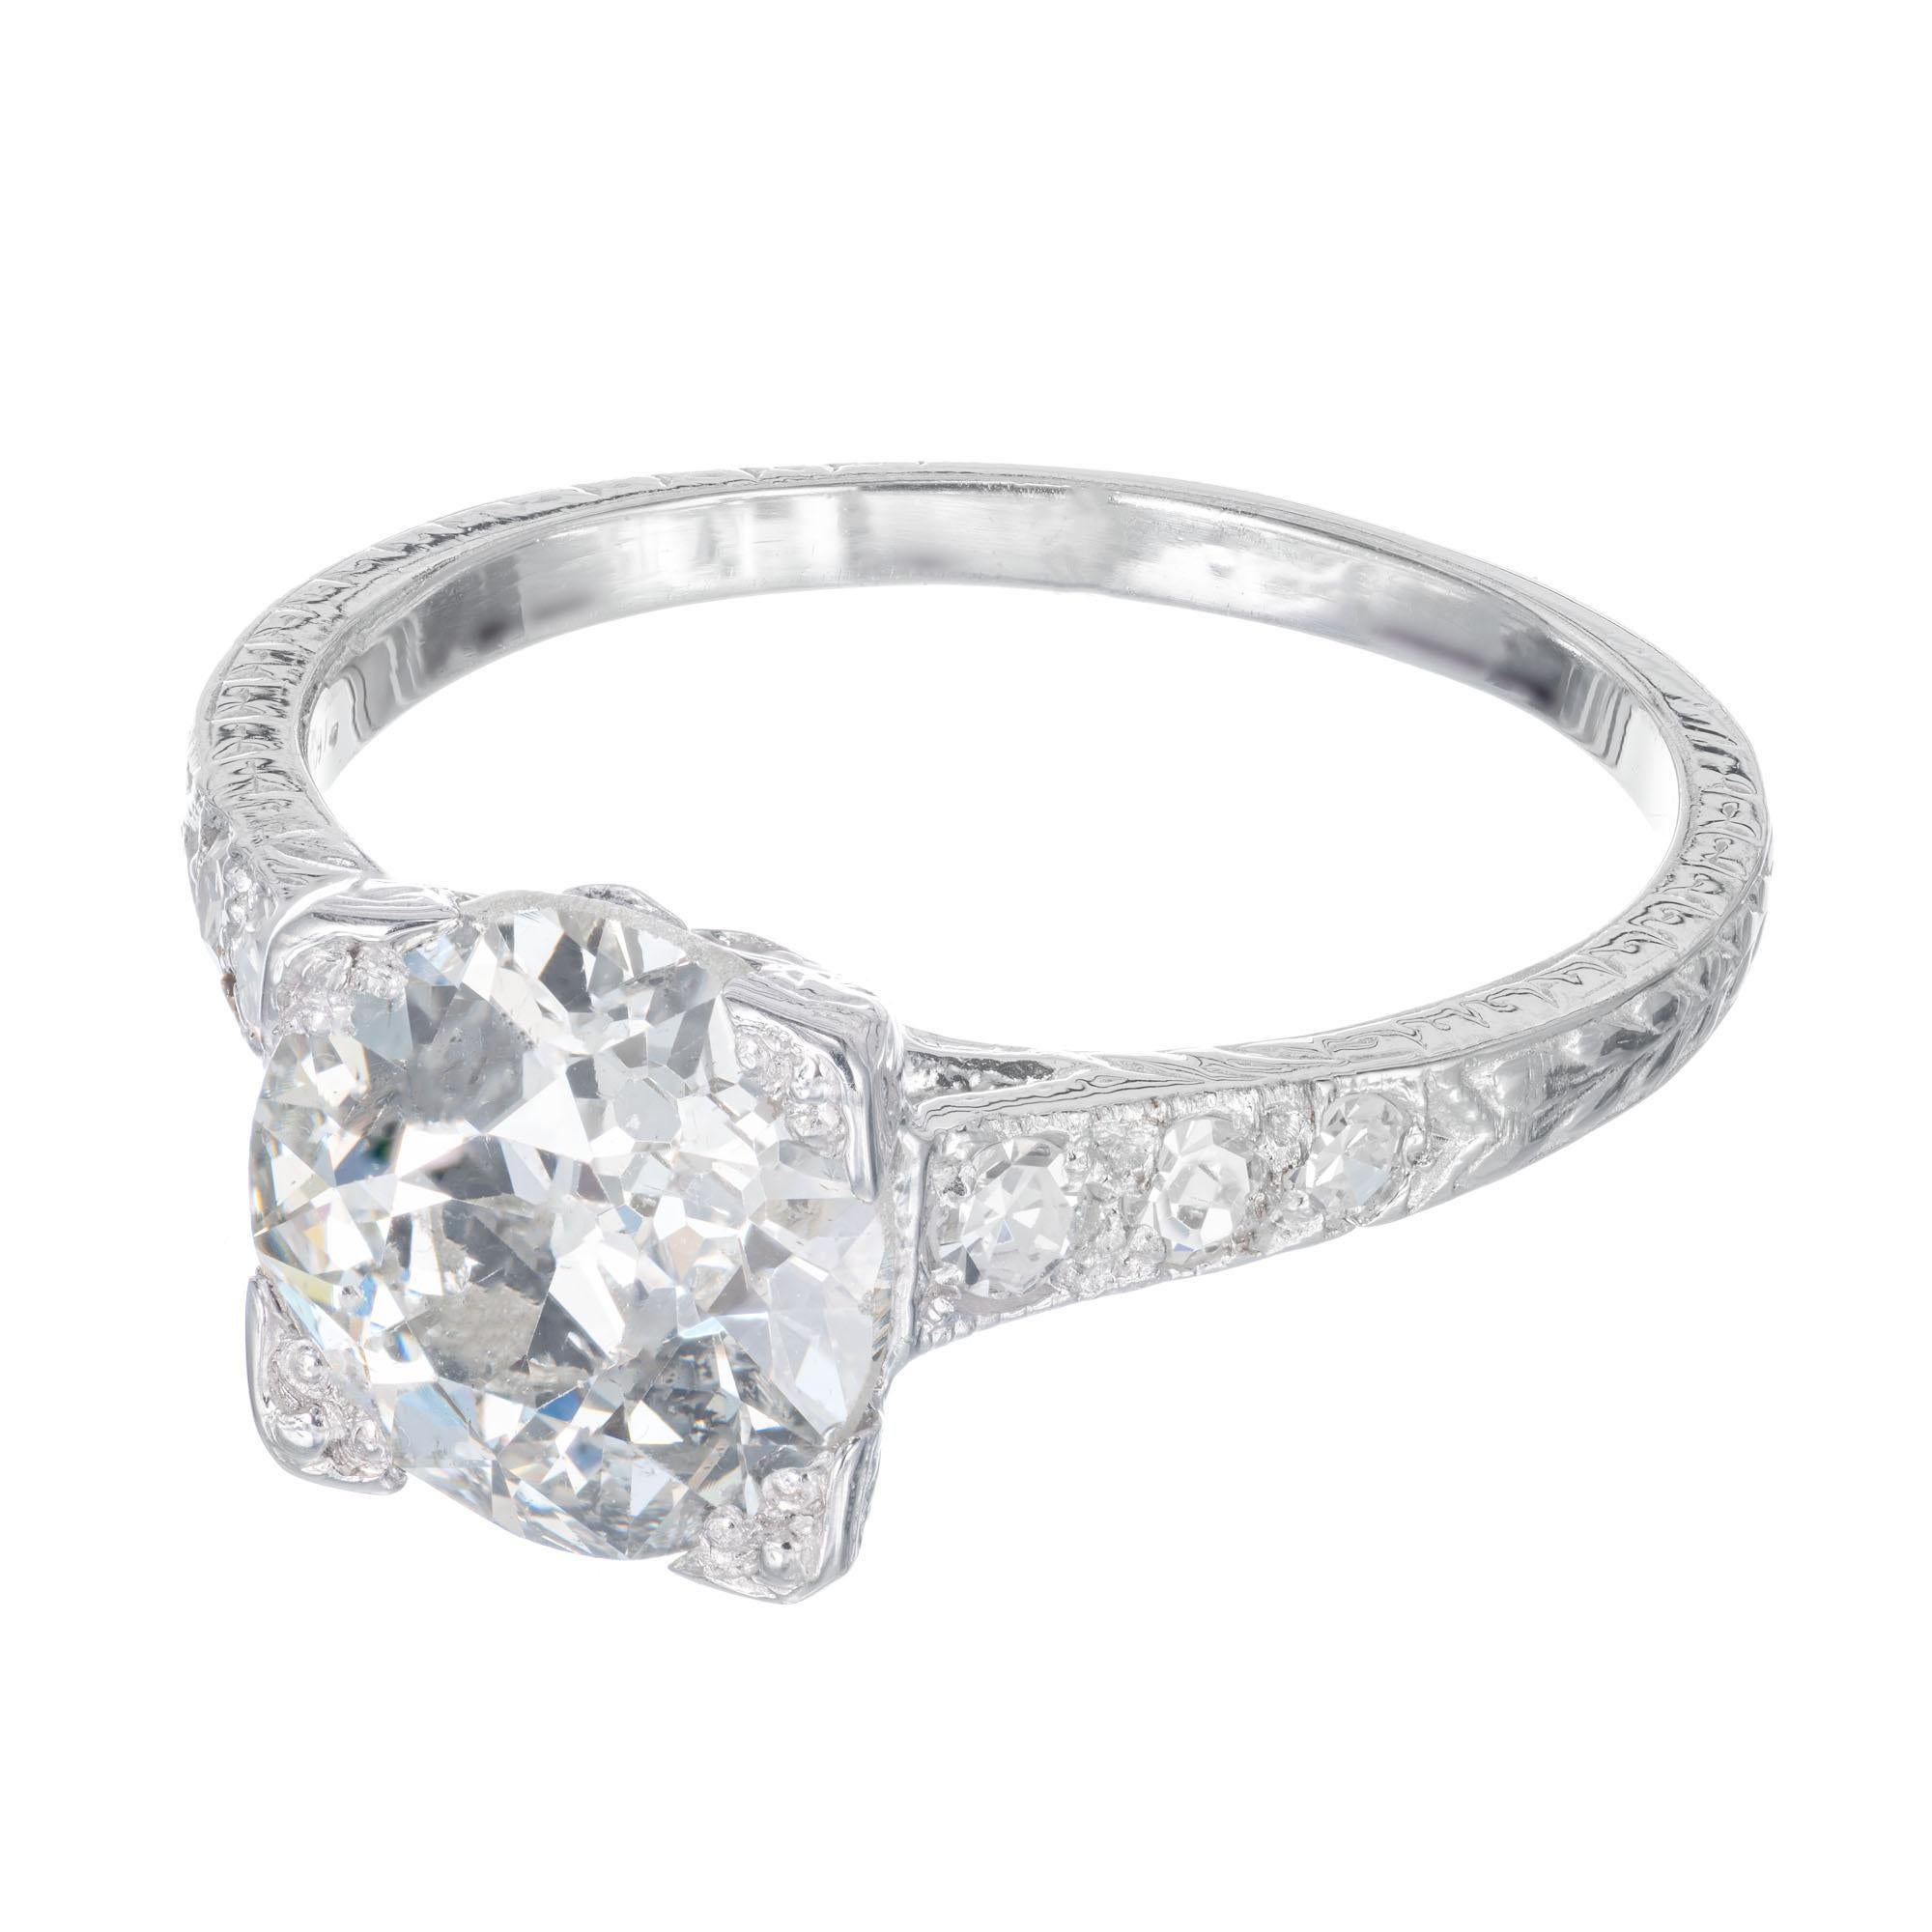 1.96 carat Old European brilliant cut diamond engagement ring. EGL Certified.  Small table and raised crown create a very sparkly diamond. Circa 1900.

1 Old European cut diamond I-J I, approx. 1.96ct EGL Certificate # US40084111D
6 single cut